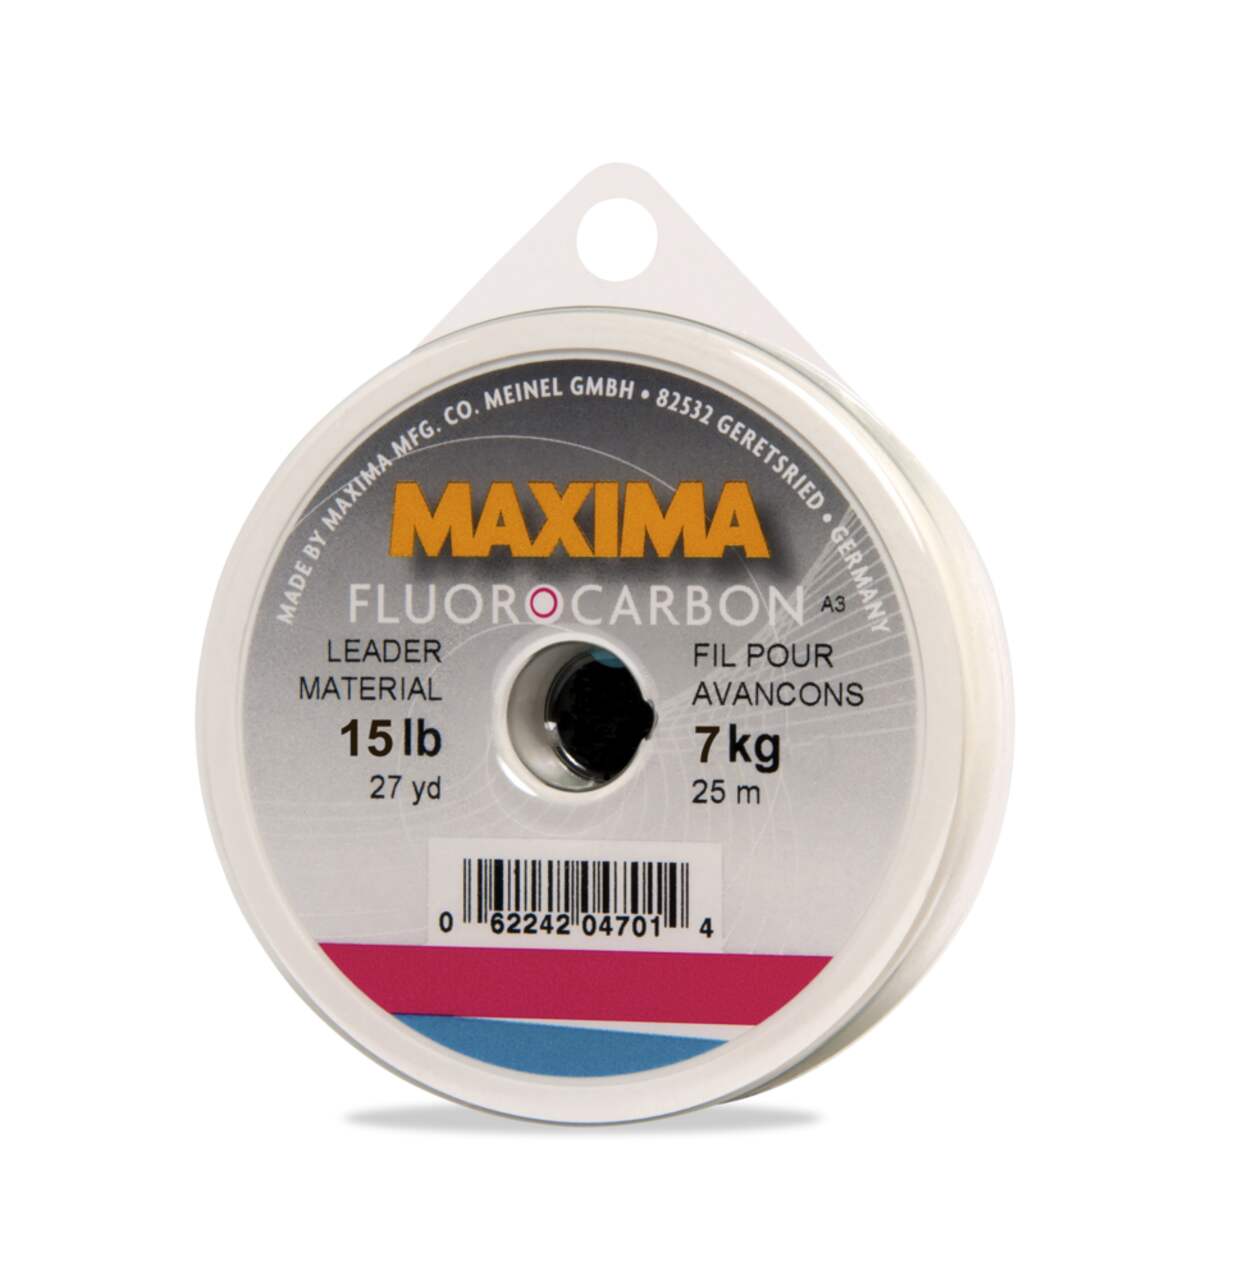 Maxima Fluorocarbon Leader Material, Clear